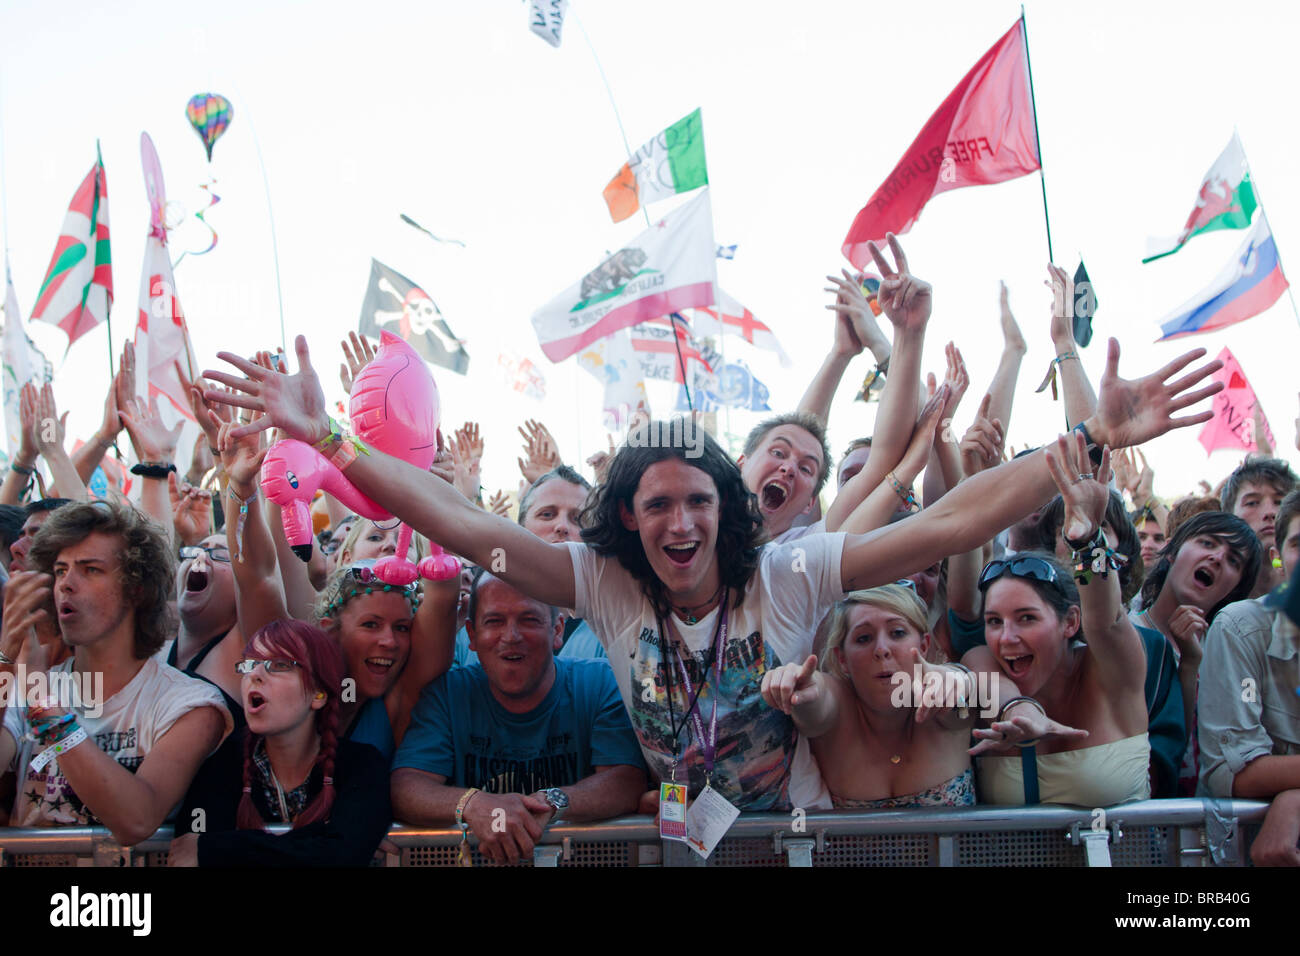 Crowd and Atmosphere at a music Festival. Stock Photo